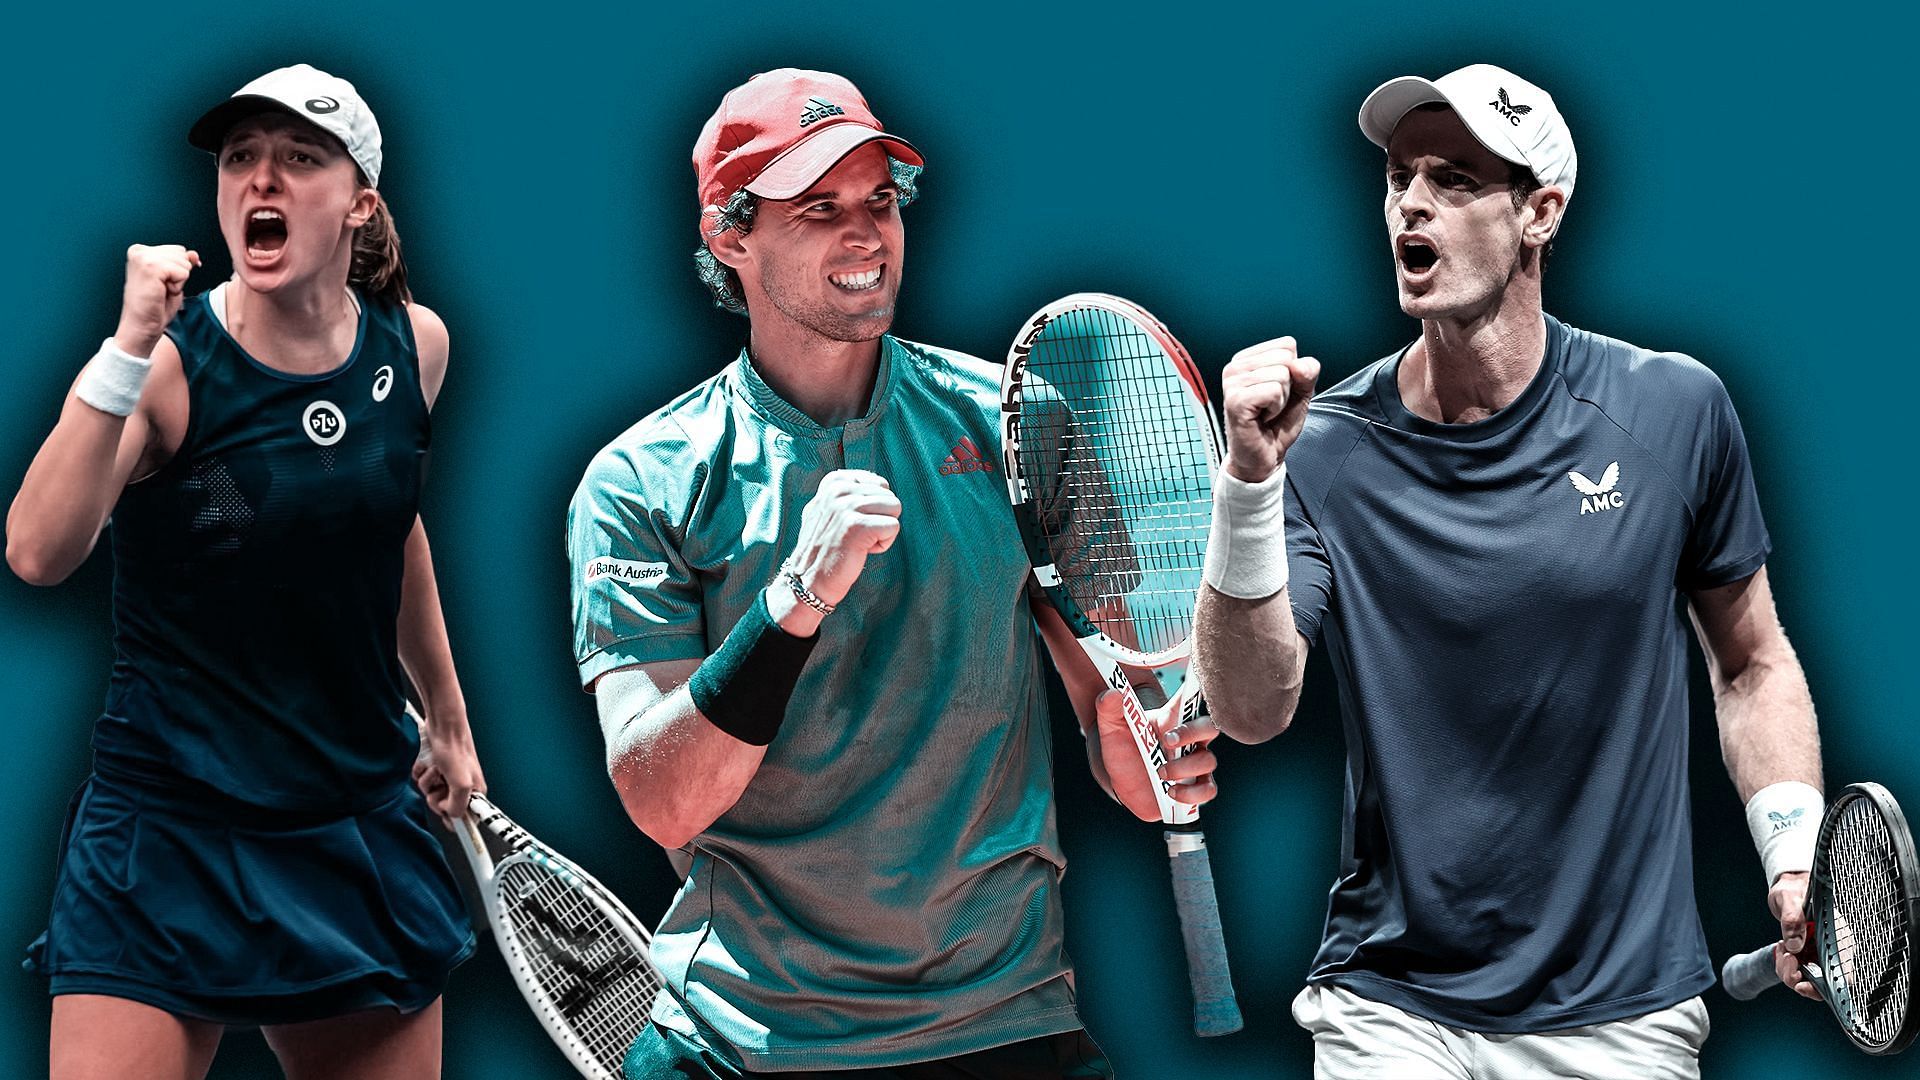 From L-R: Iga Swiatek, Dominic Thiem and Andy Murray.